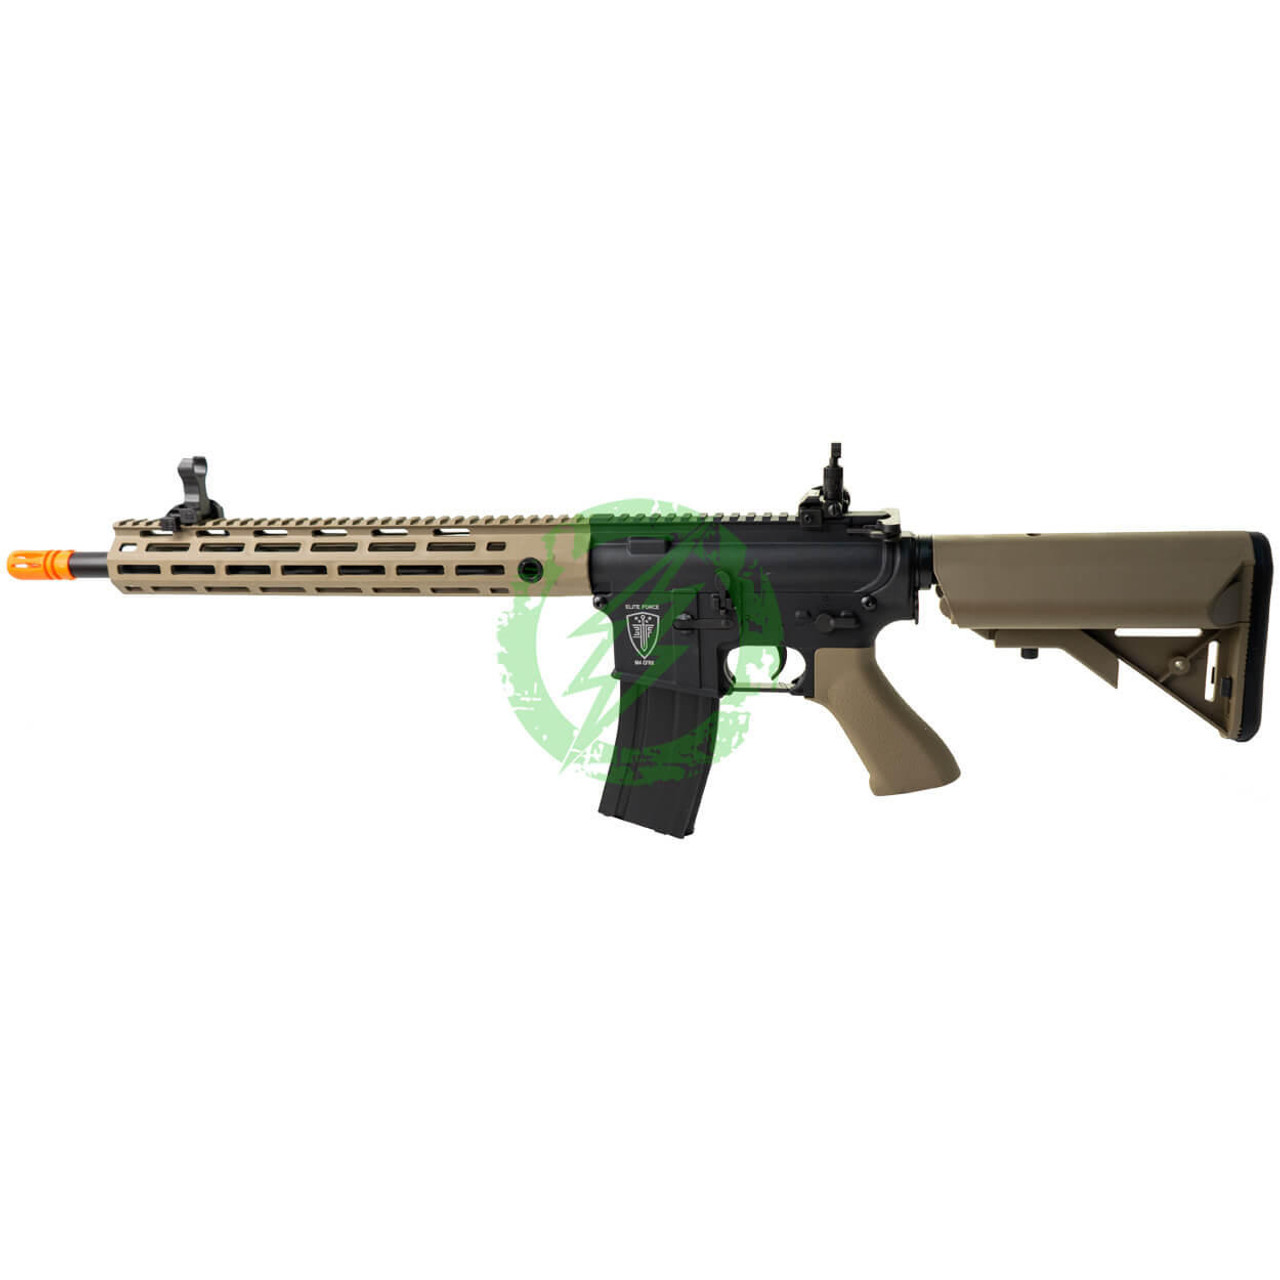  Umarex Elite Force M4 CFRX Rifle with EYE Trace Built in Tracer | Black & Tan 